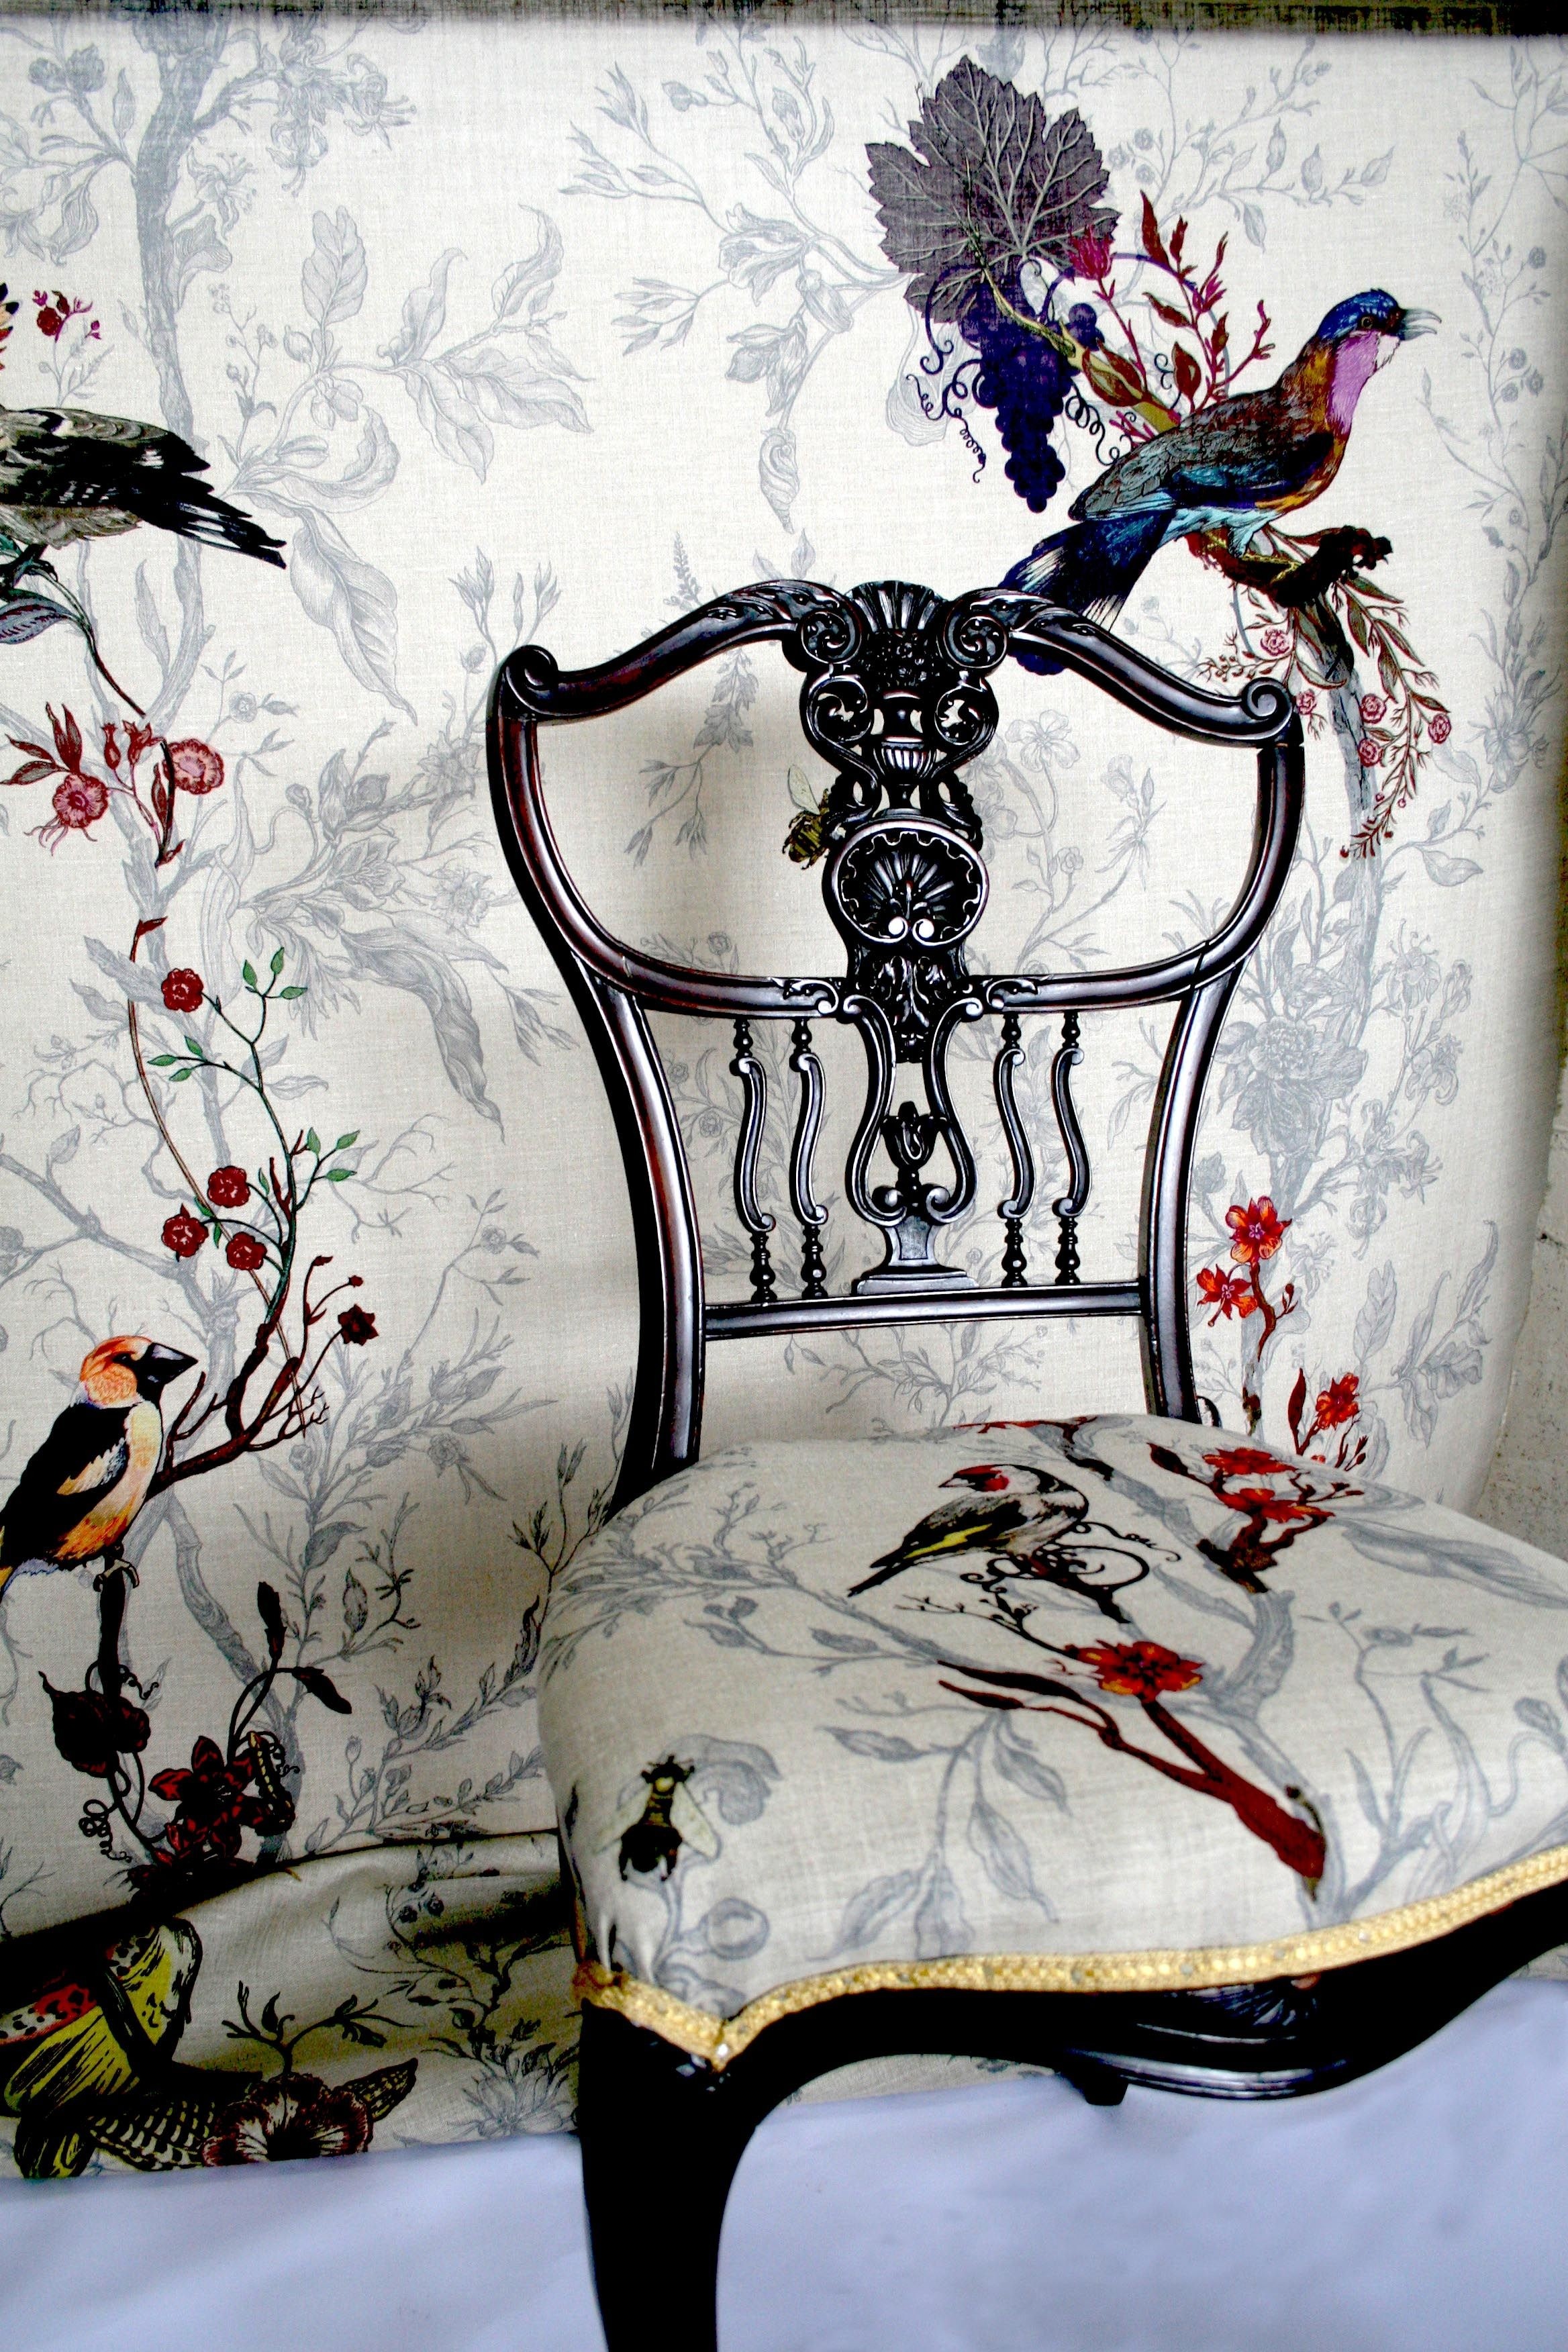 Matching wallpaper and upholstery timourous beasties